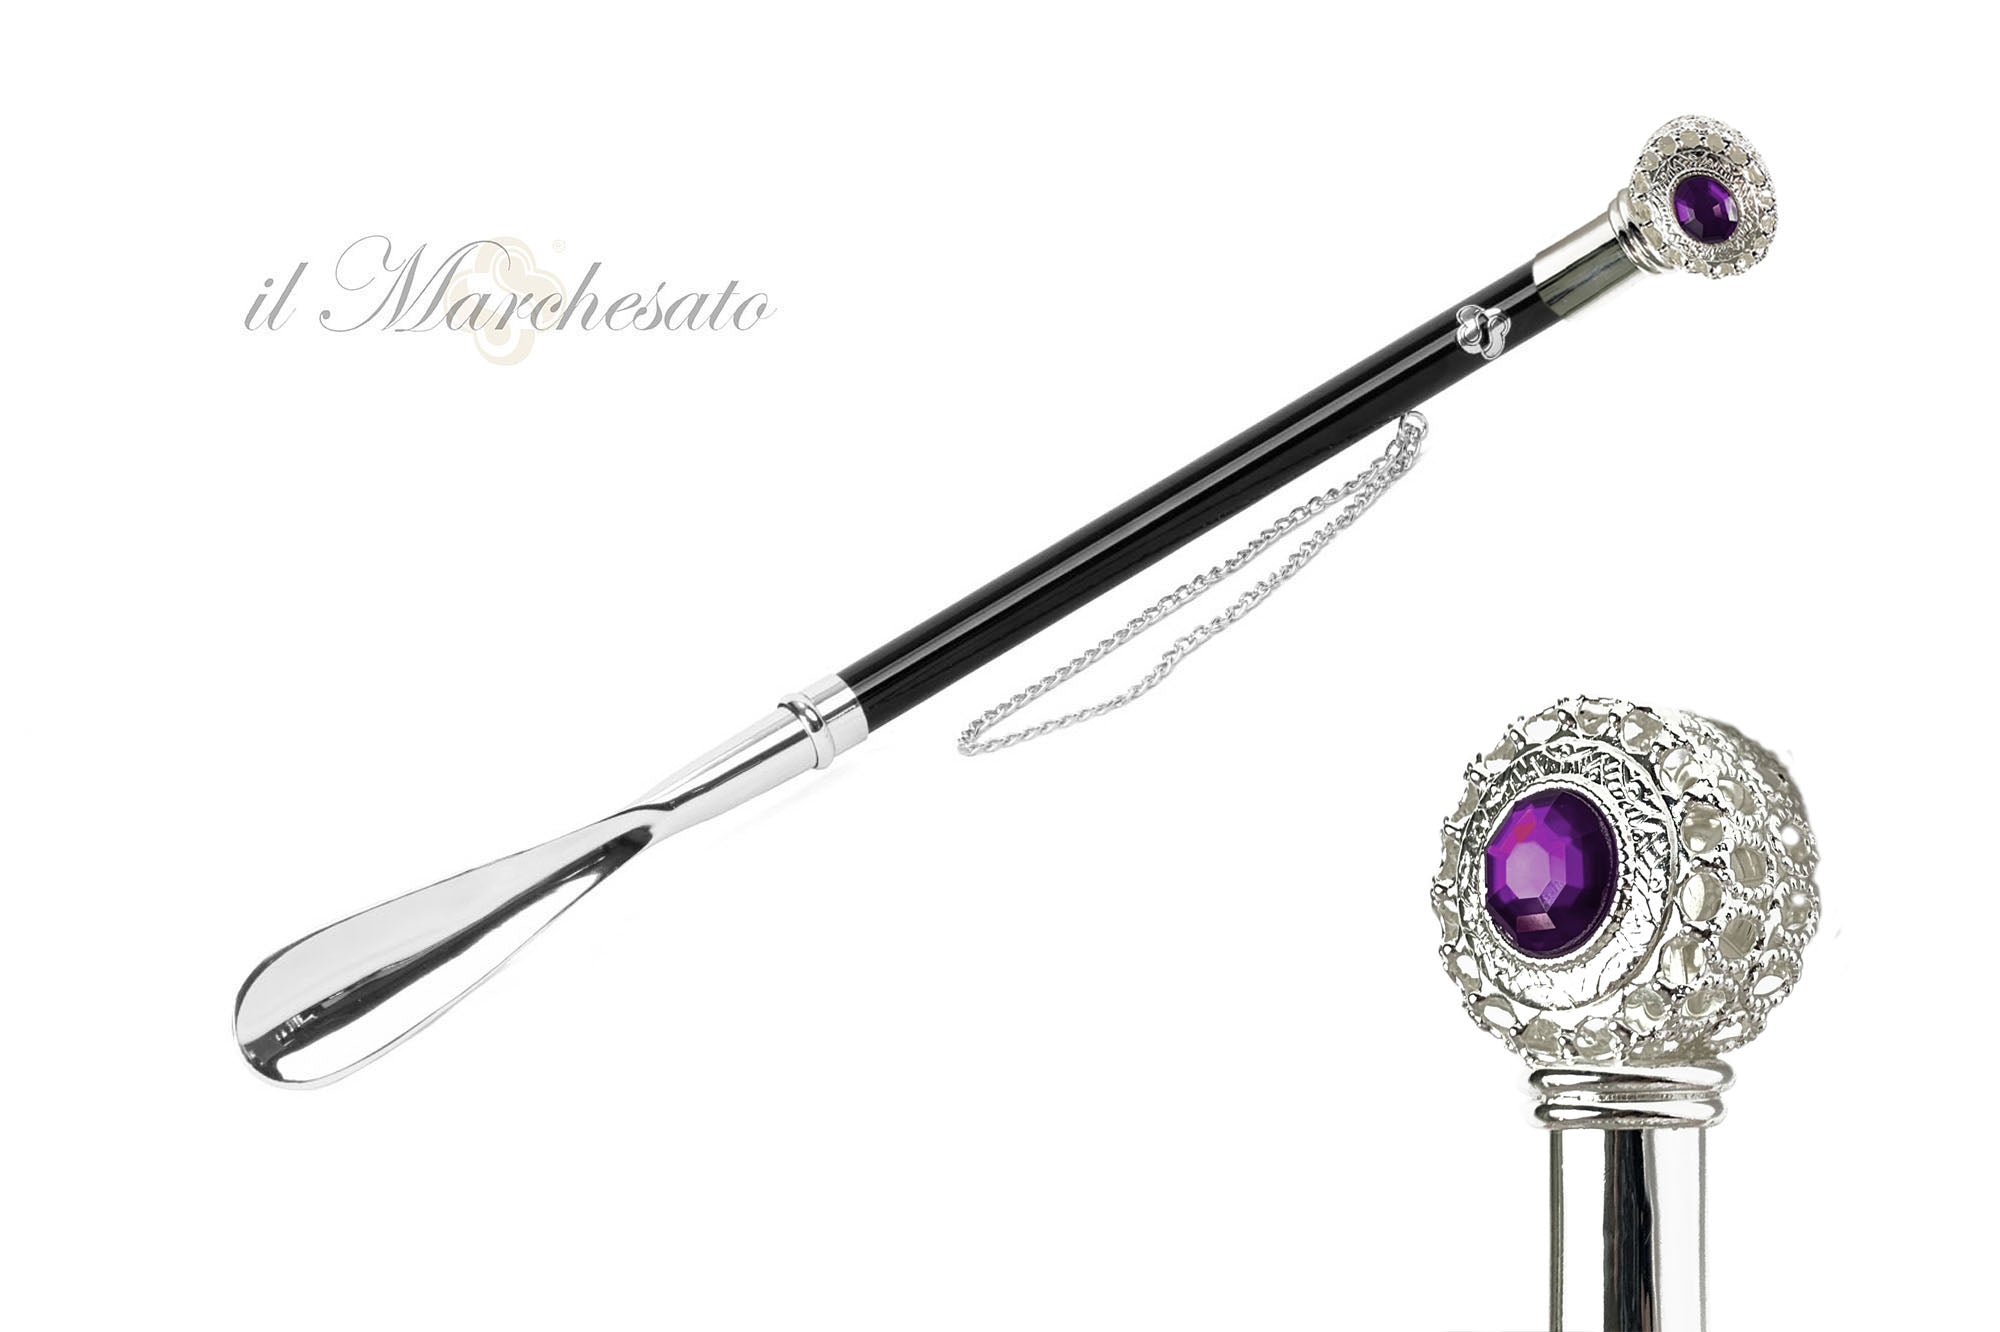 Luxury Shoehorn with Amethyst crystals